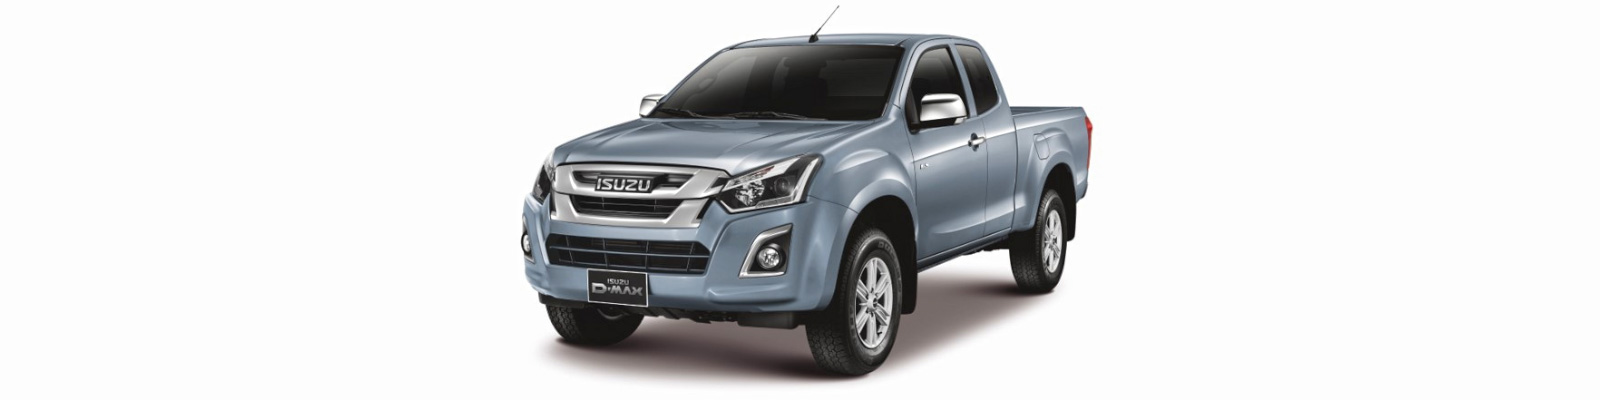 Accessories for Isuzu D-Max Extended Cab 2017-2020